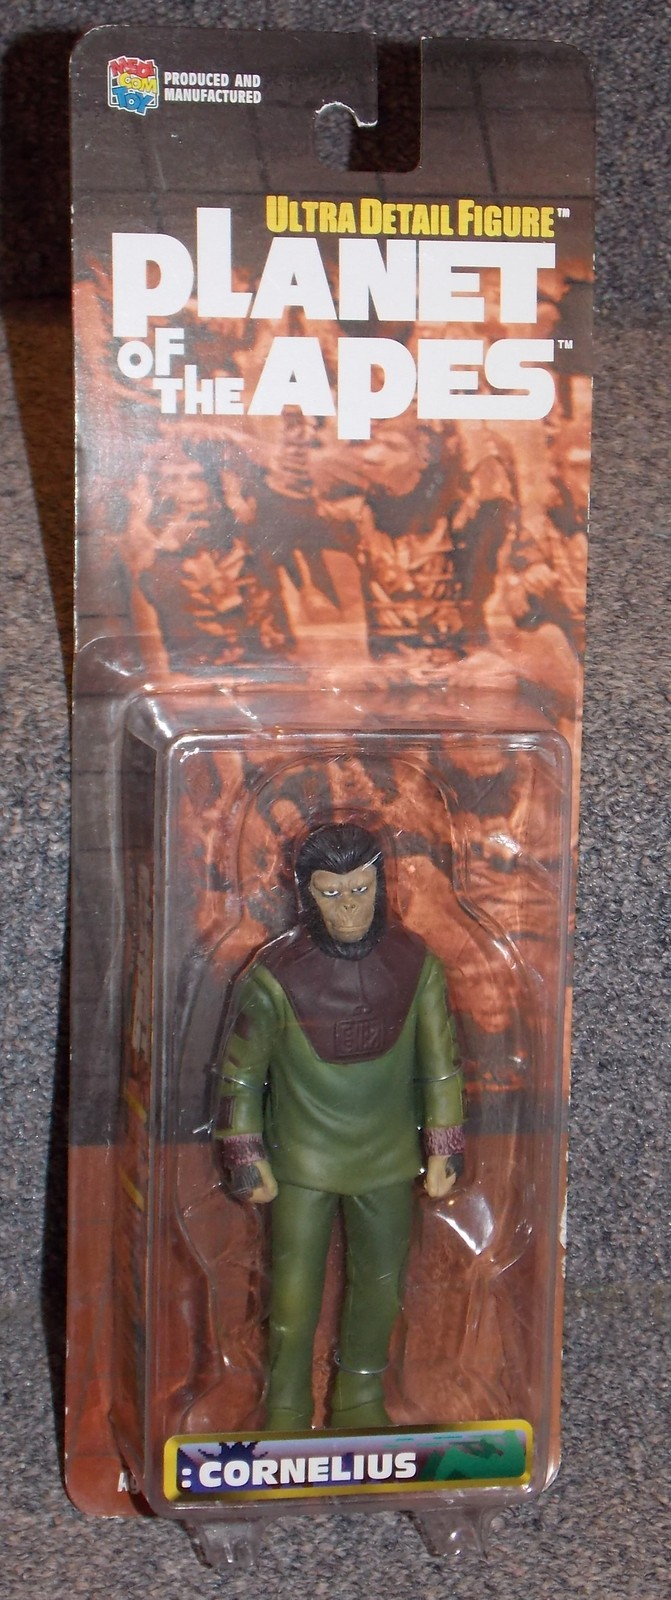 2000 Planet Of The Apes Cornelius Figure New In The Package - $49.99